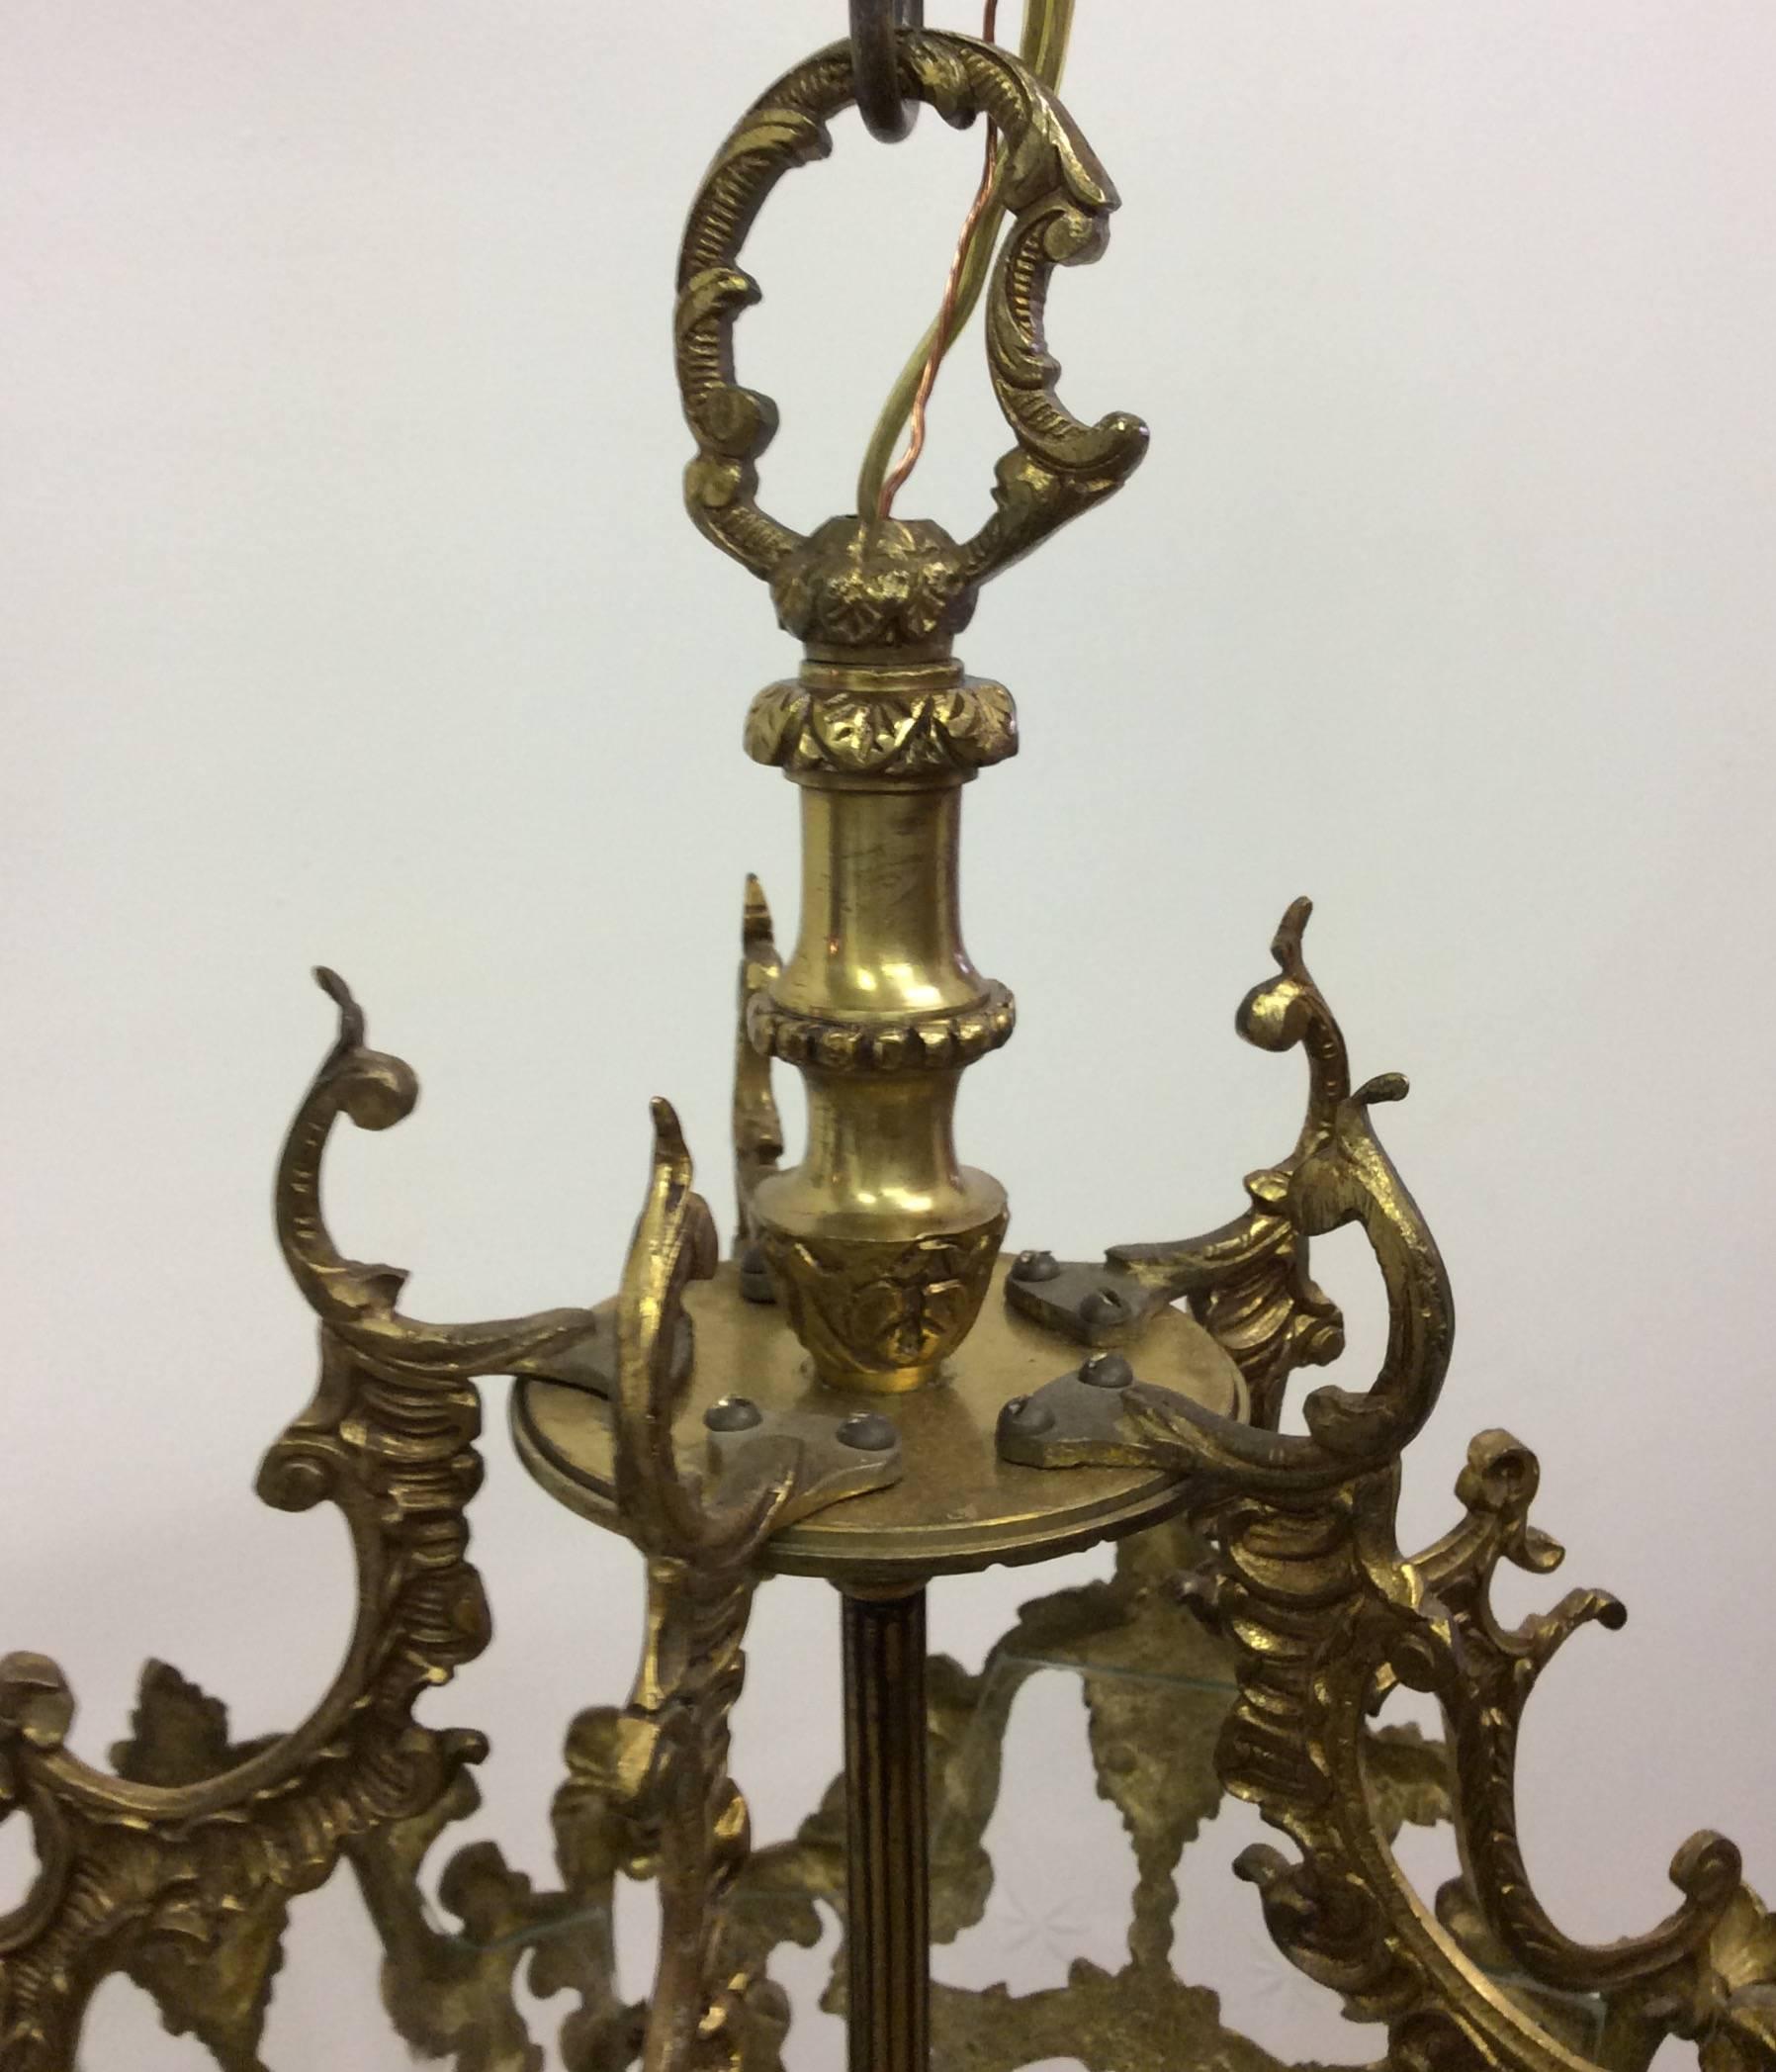 1950s, Etched Glass Ornate Brass Lantern In Excellent Condition For Sale In Mobile, AL